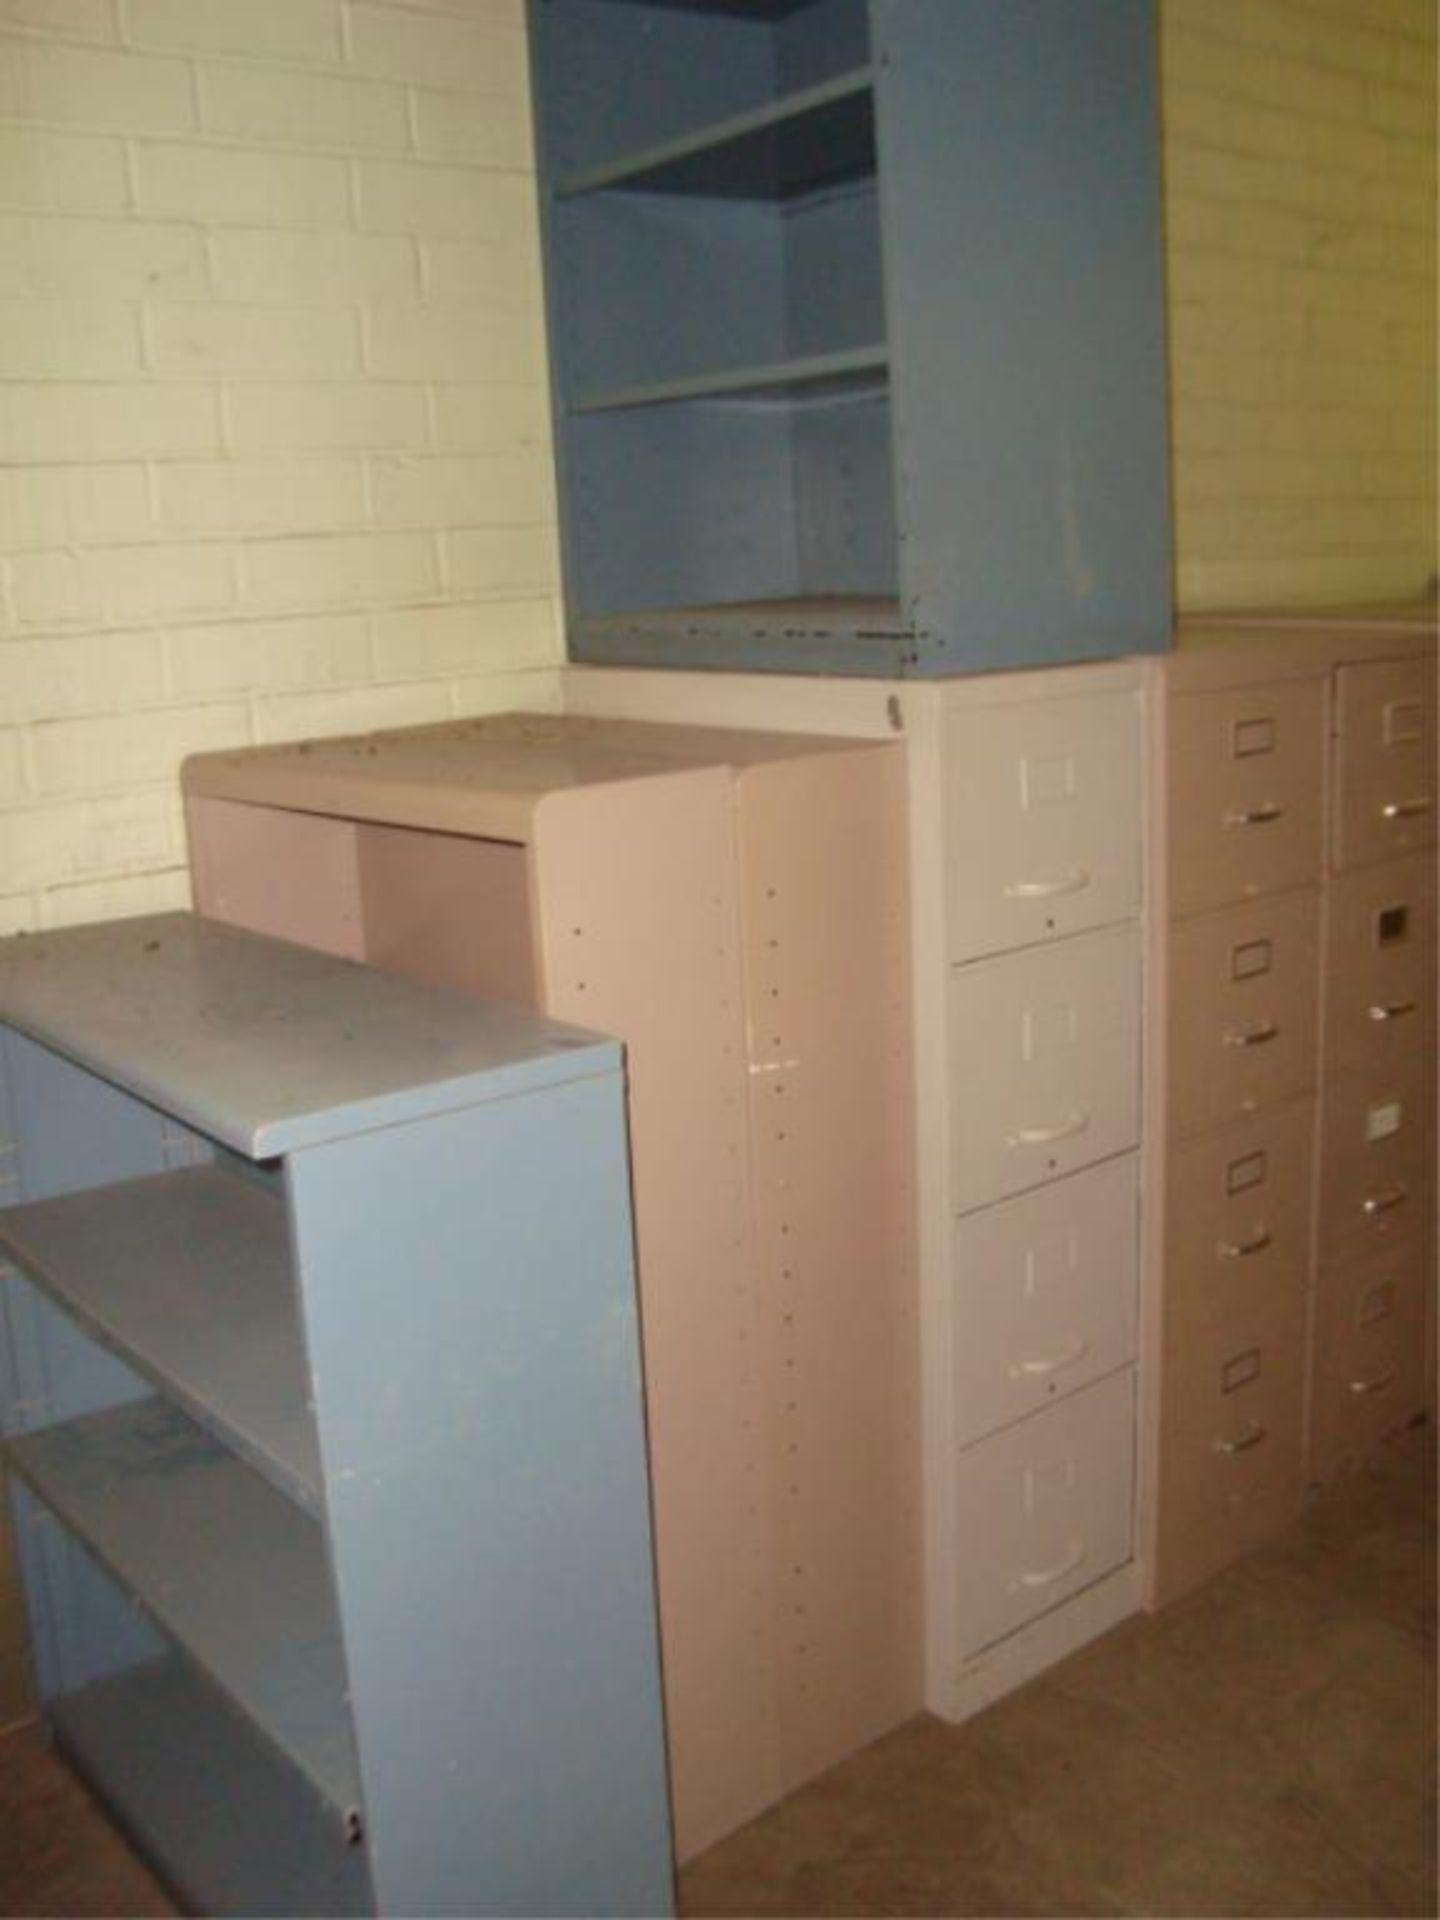 Vertical File Cabinets - Image 4 of 4